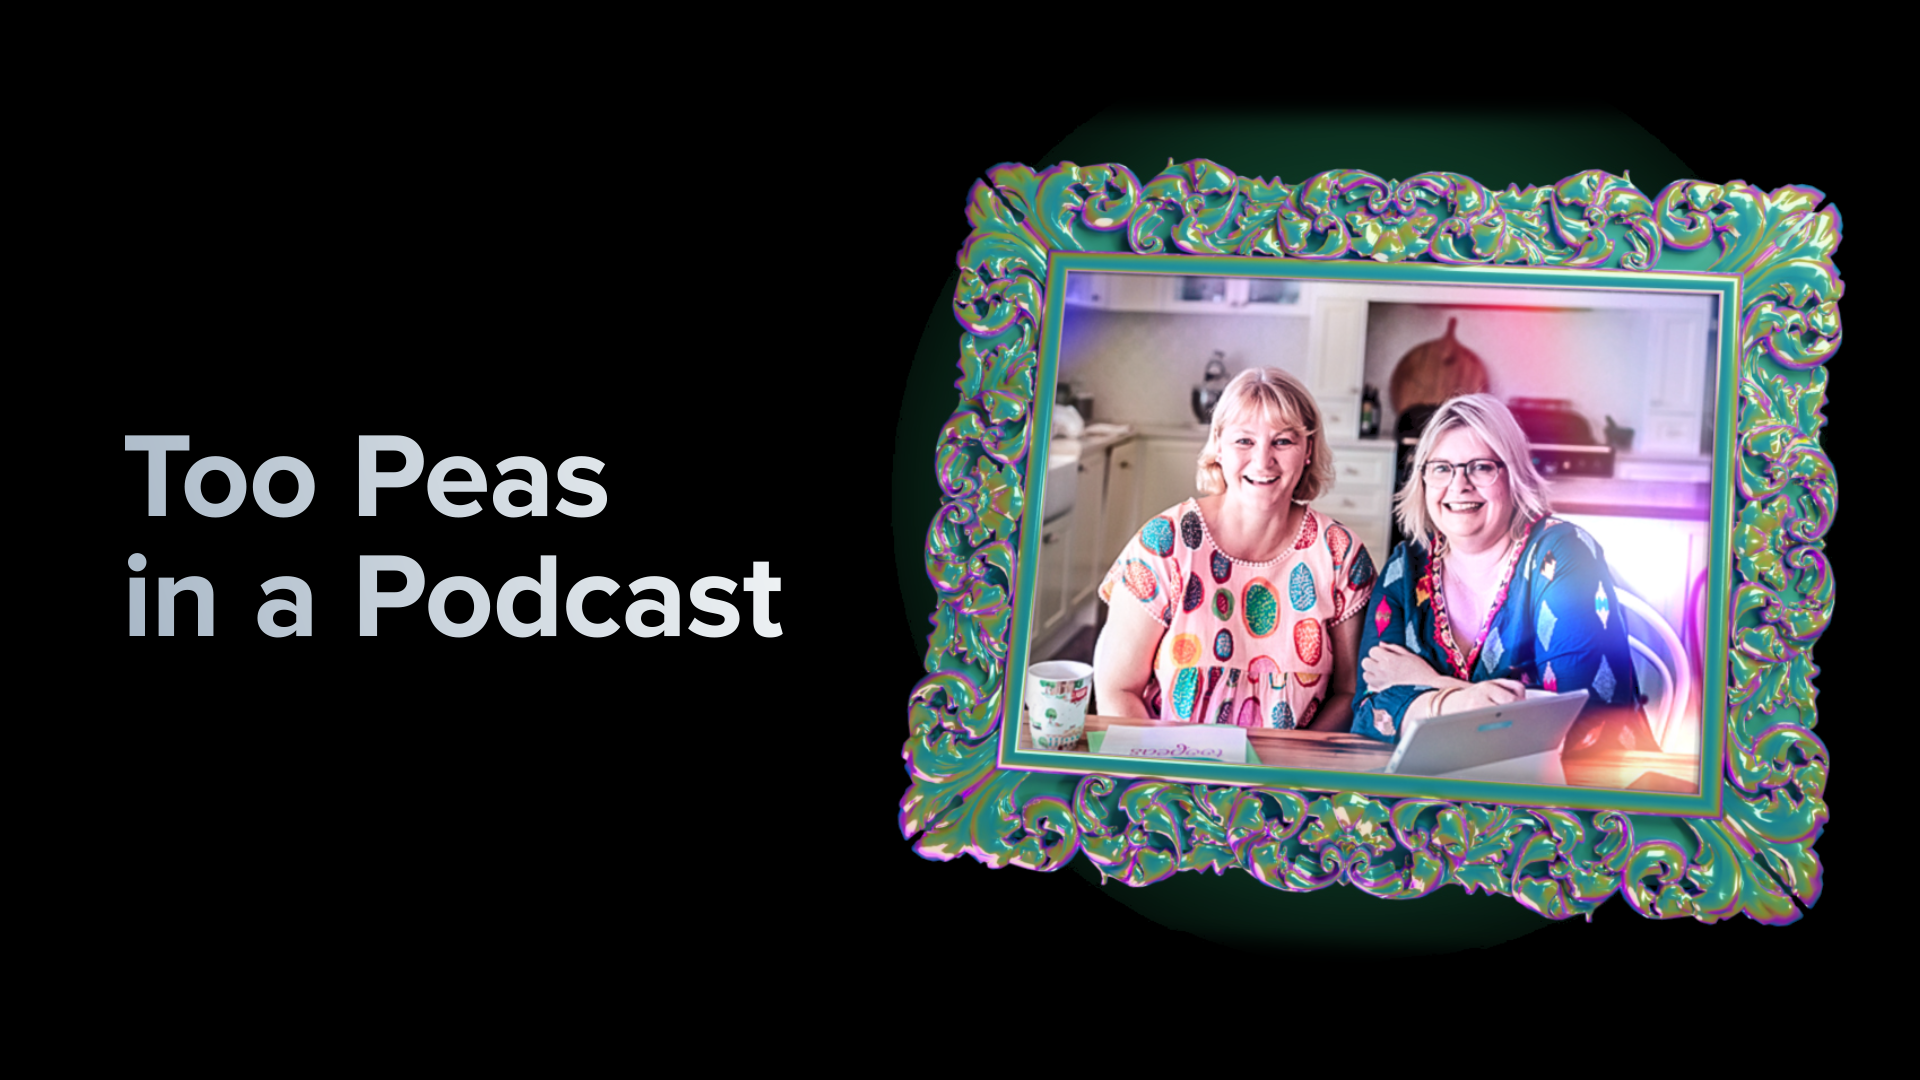 A framed image of Kate and Mandy from Too Peas in a Podcast sitting at a desk in a kitchen.